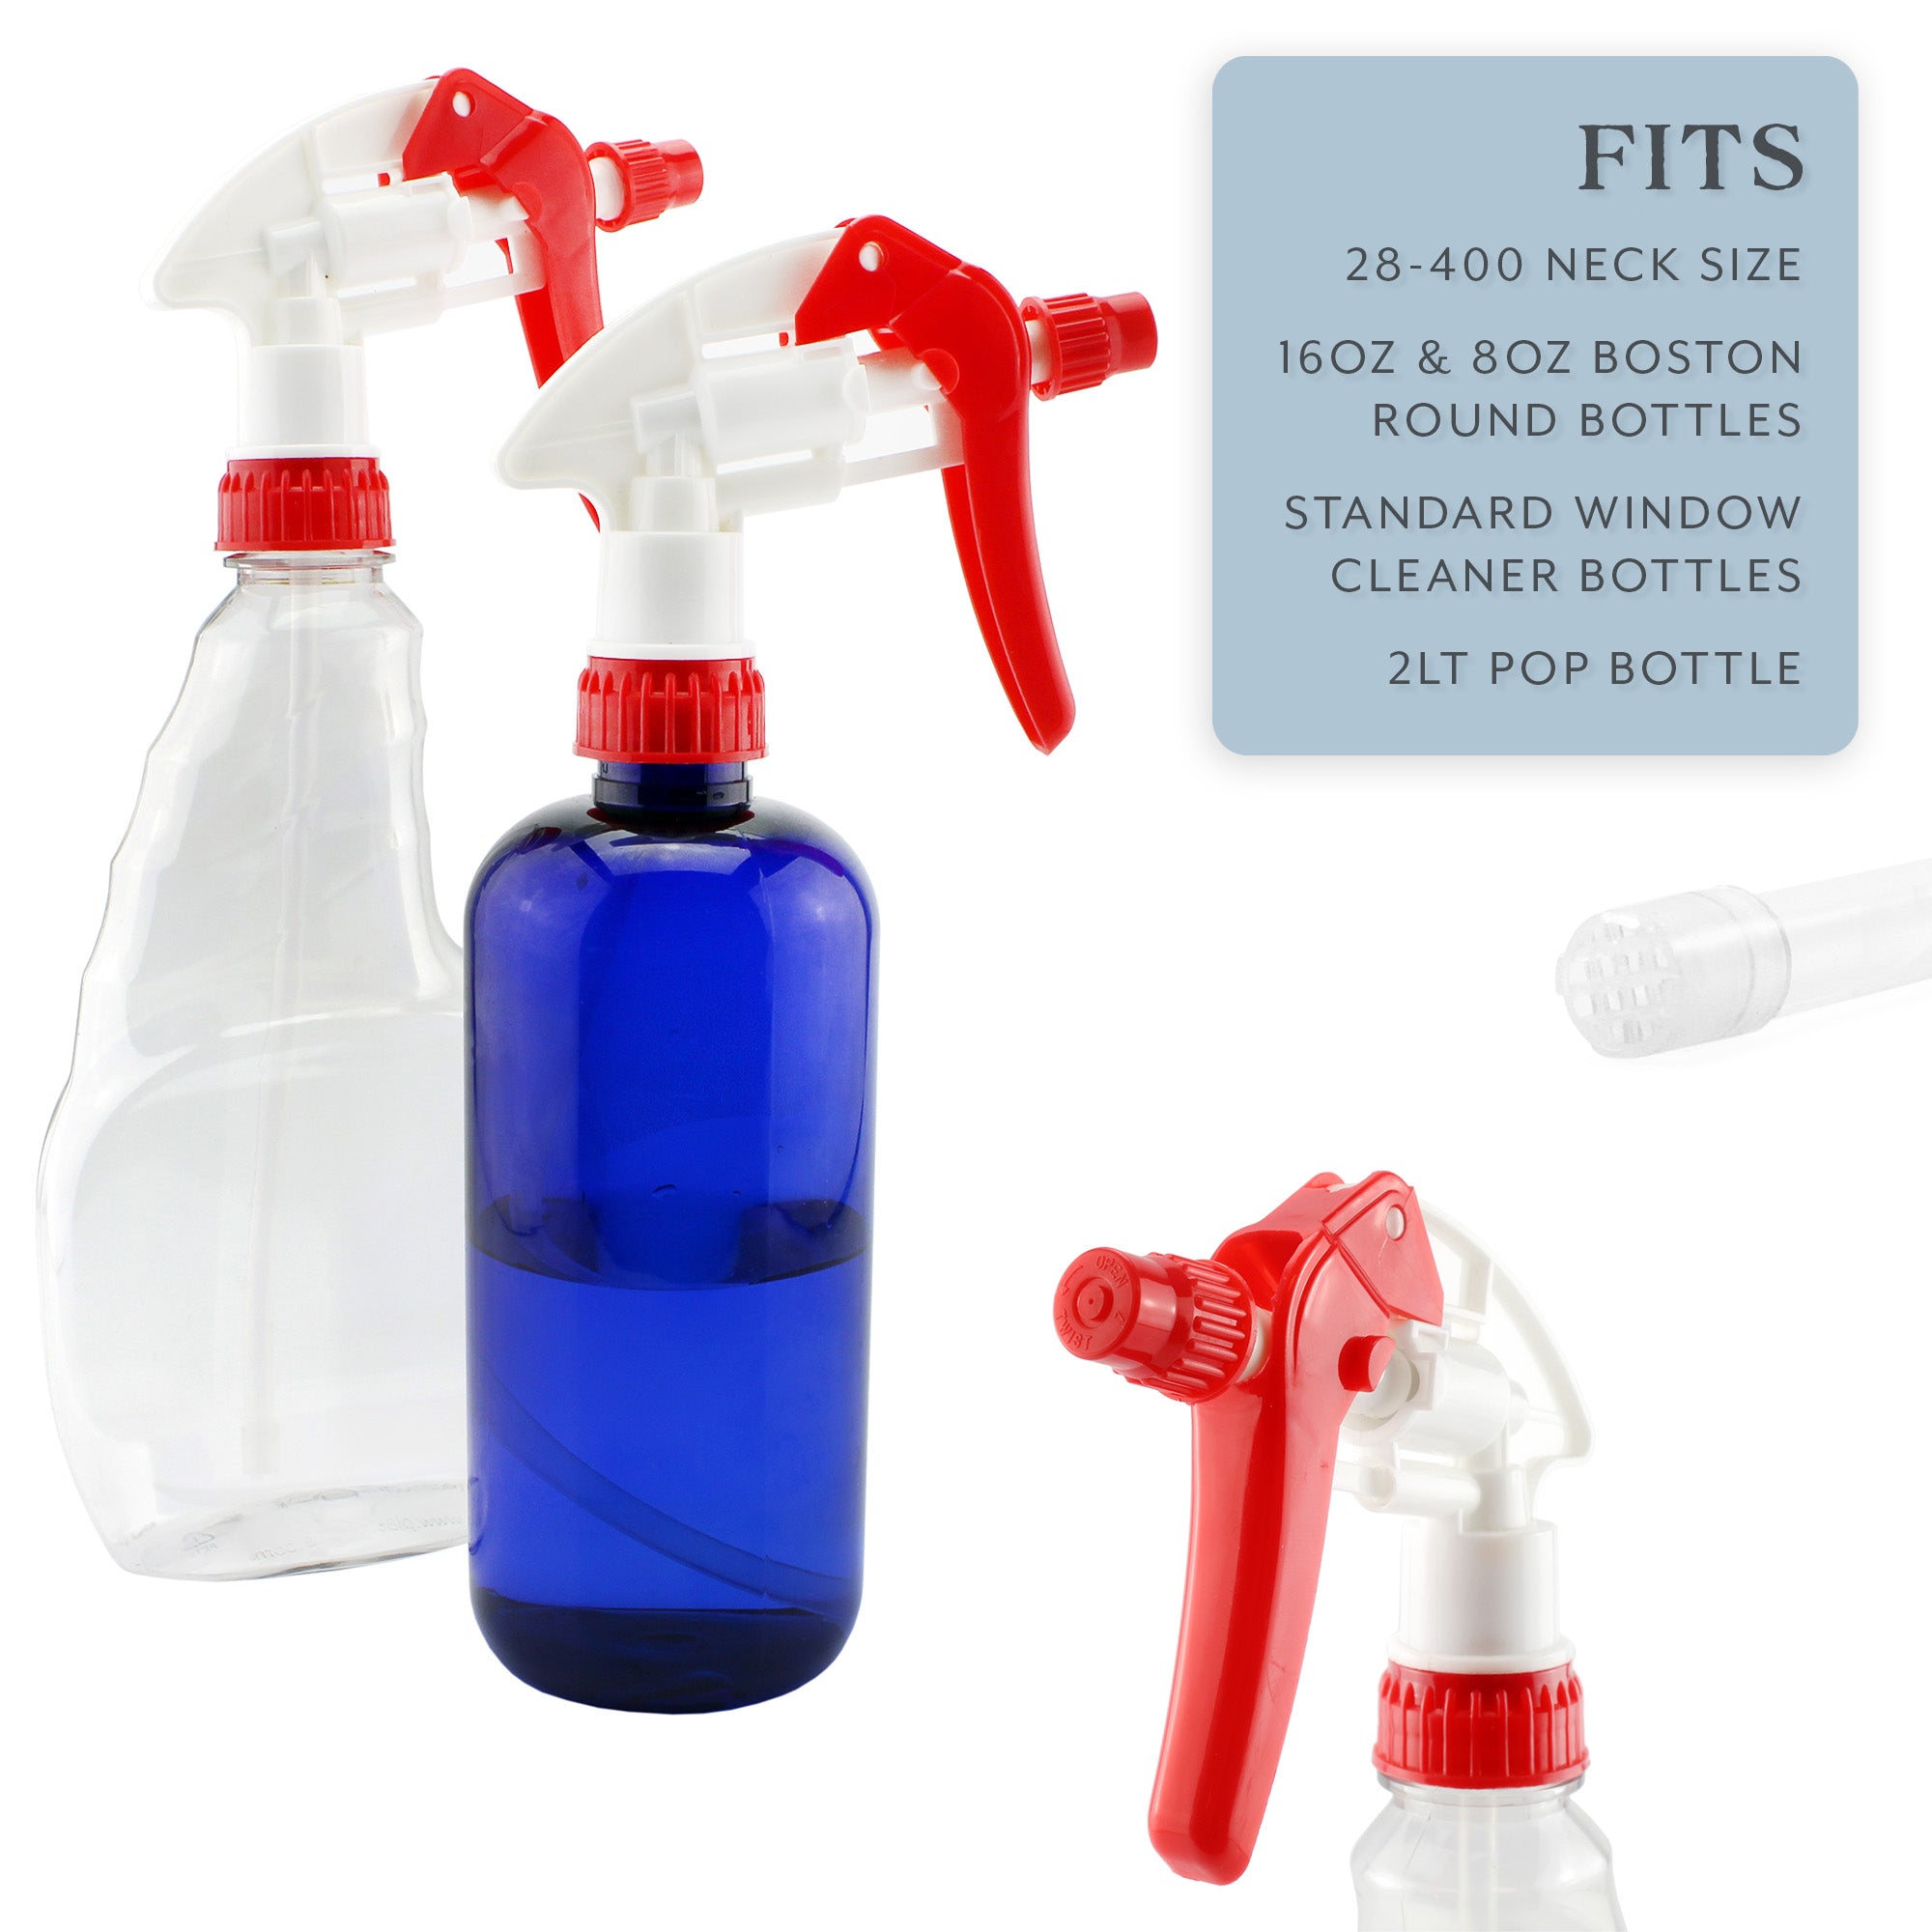 Pack of 10 Spray Bottles 32oz with Chemical Resistant Sprayers